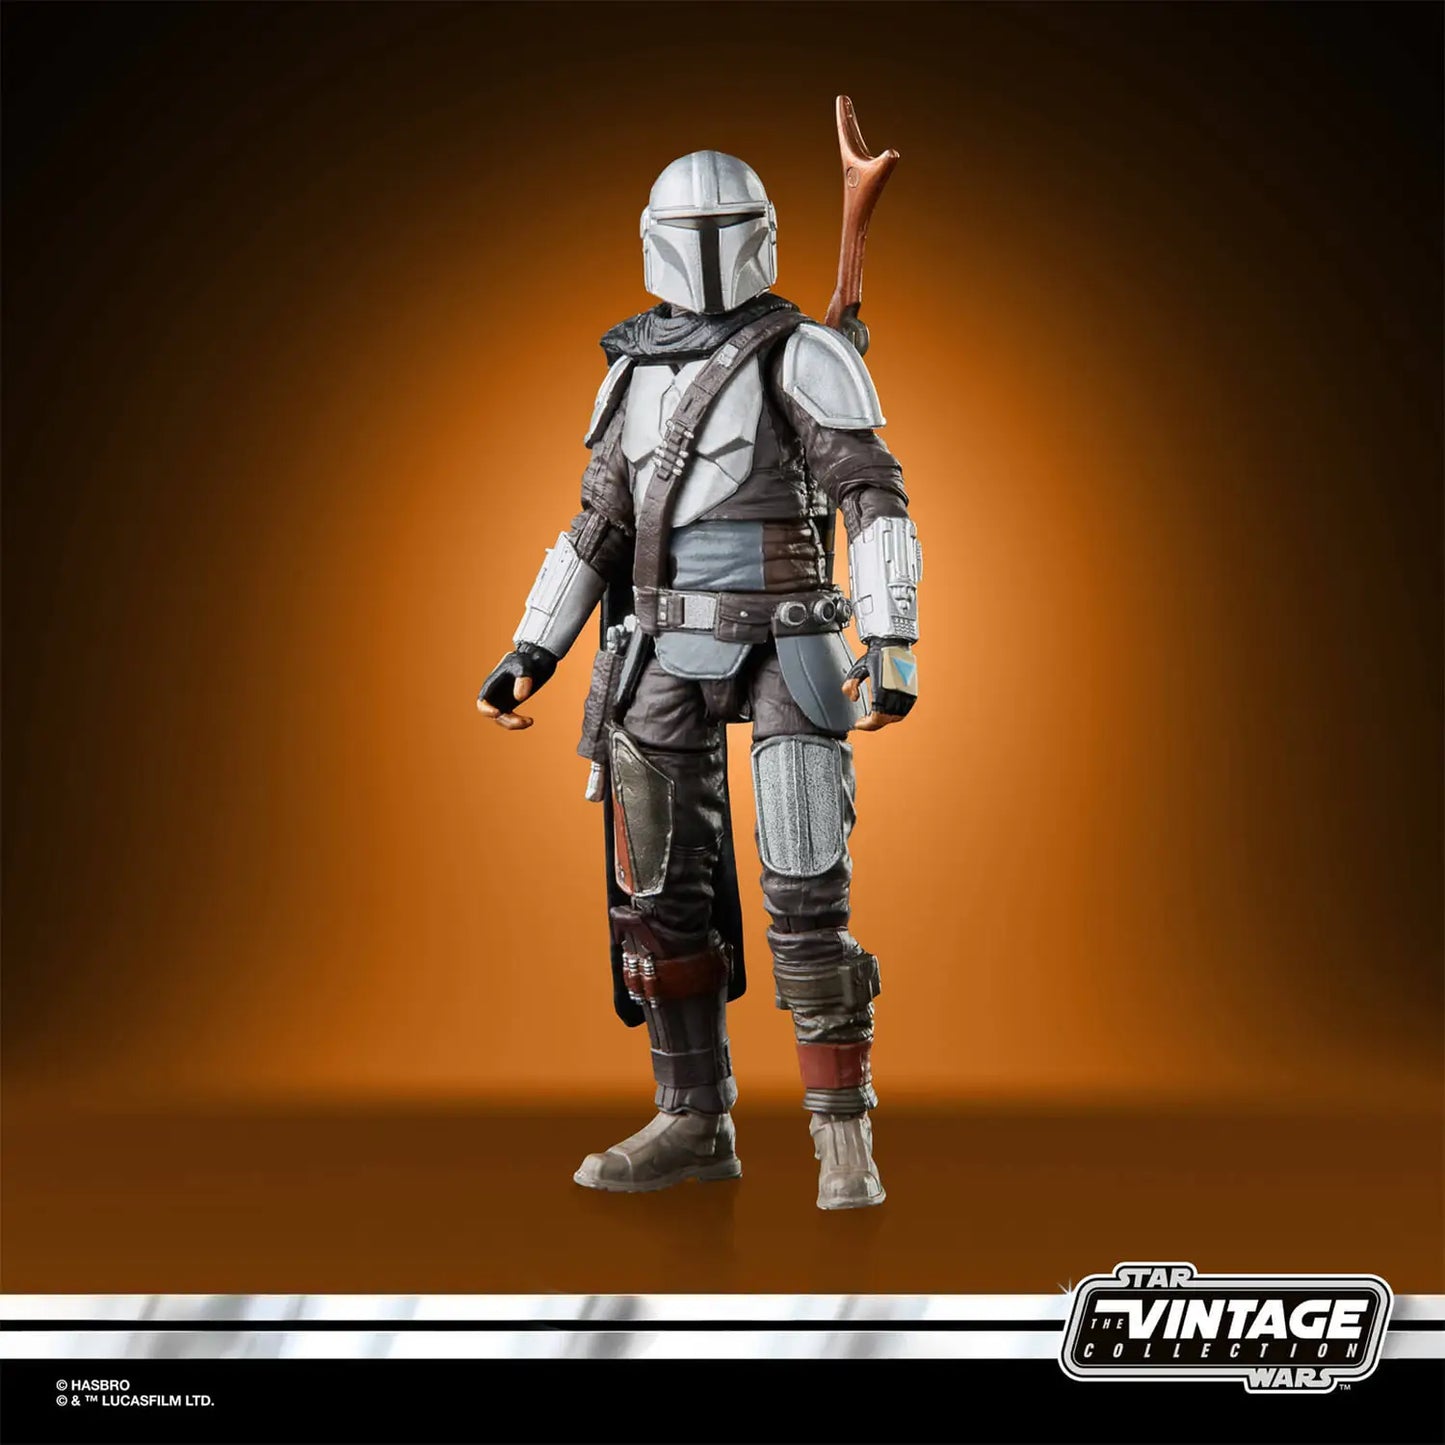 HASBRO STAR WARS THE VINTAGE COLLECTION THE MANDALORIAN ACTION FIGURE